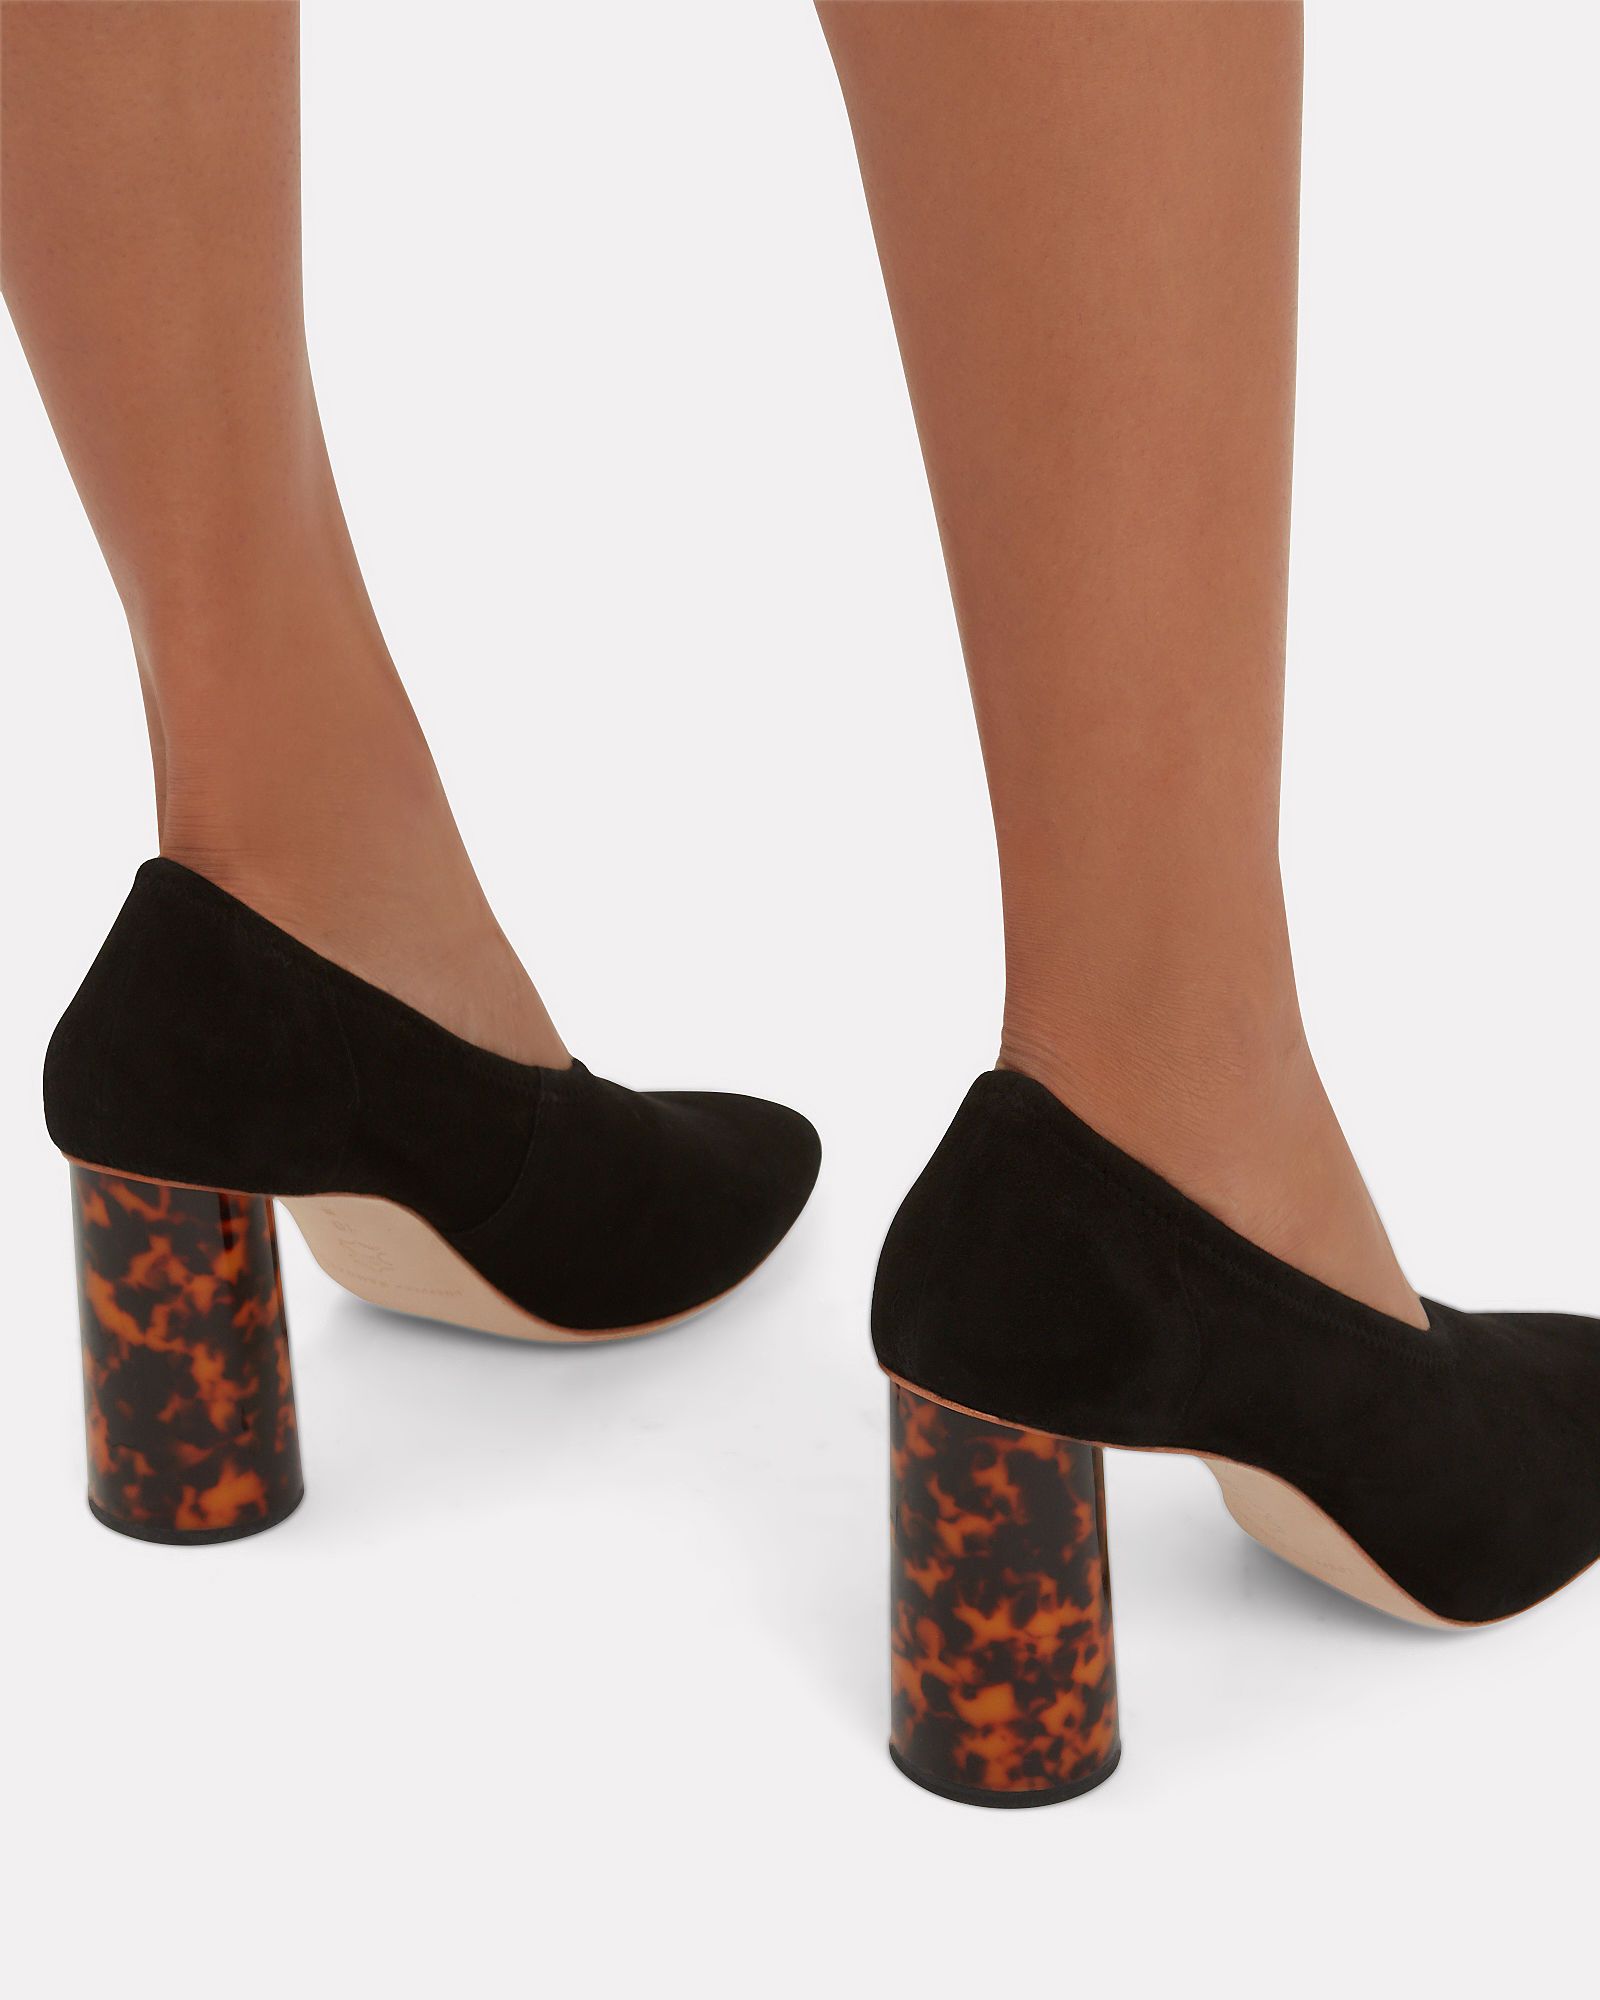 18 comfortable heels you can actually dance in